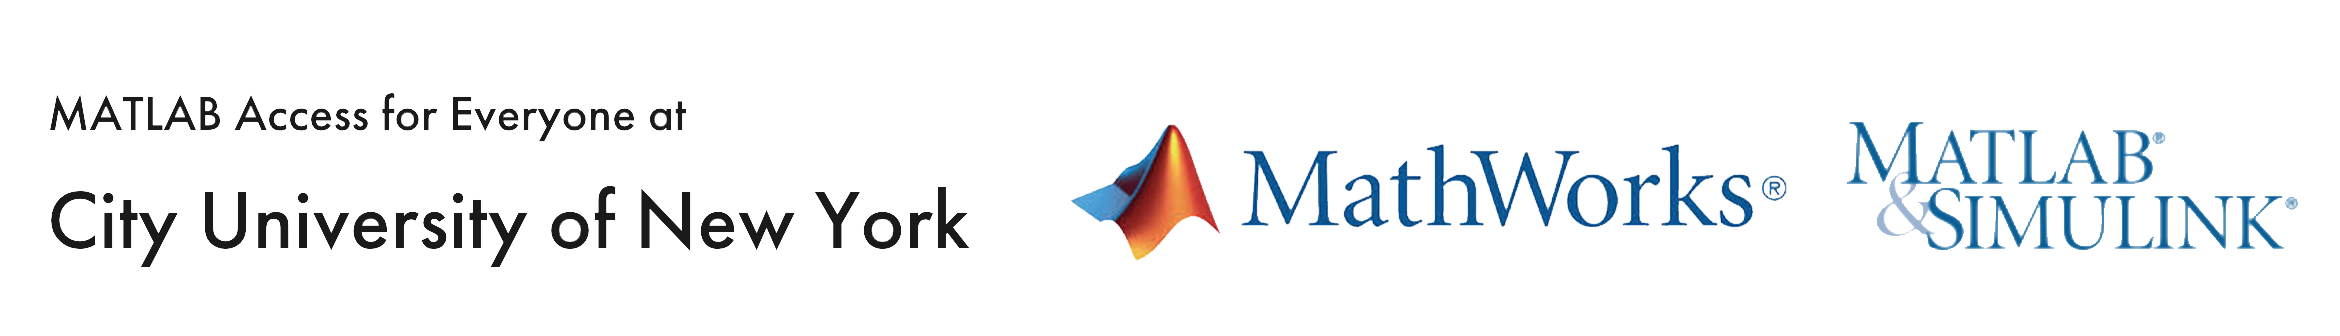 Access for Everyone at City University of New York. Logo for MathWorks, MATLAB & SIMULINK. 